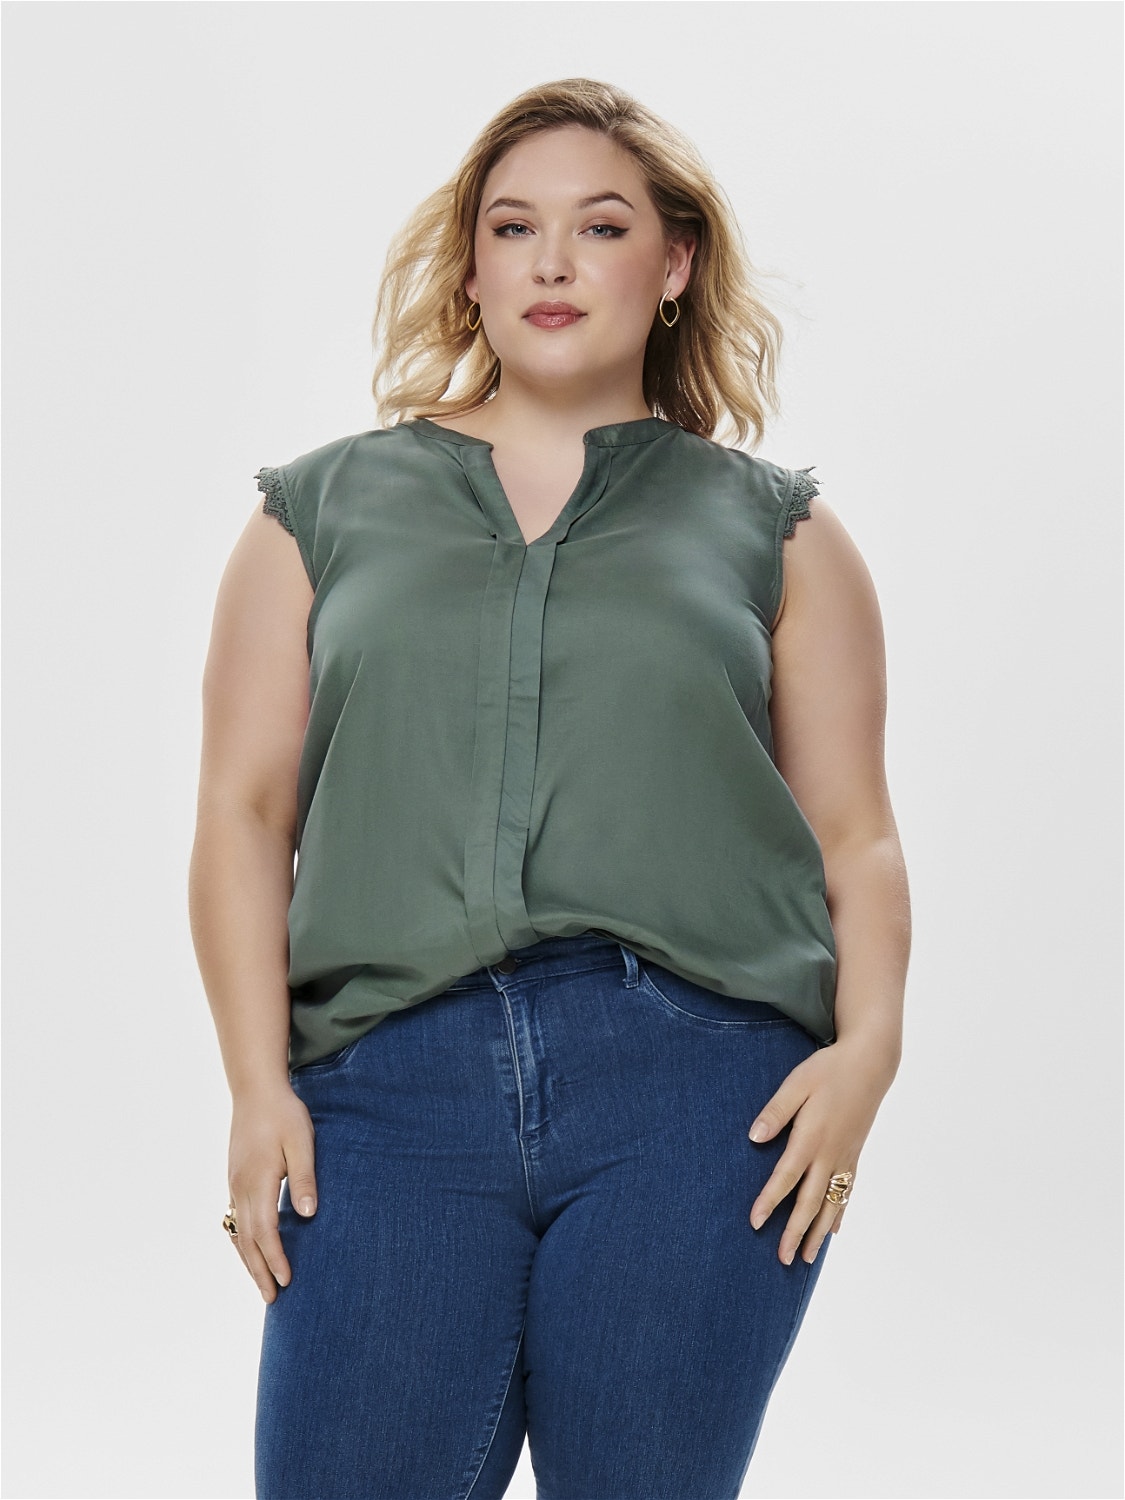 ONLY Curvy loose Sleeveless Top -Balsam Green - 15187018